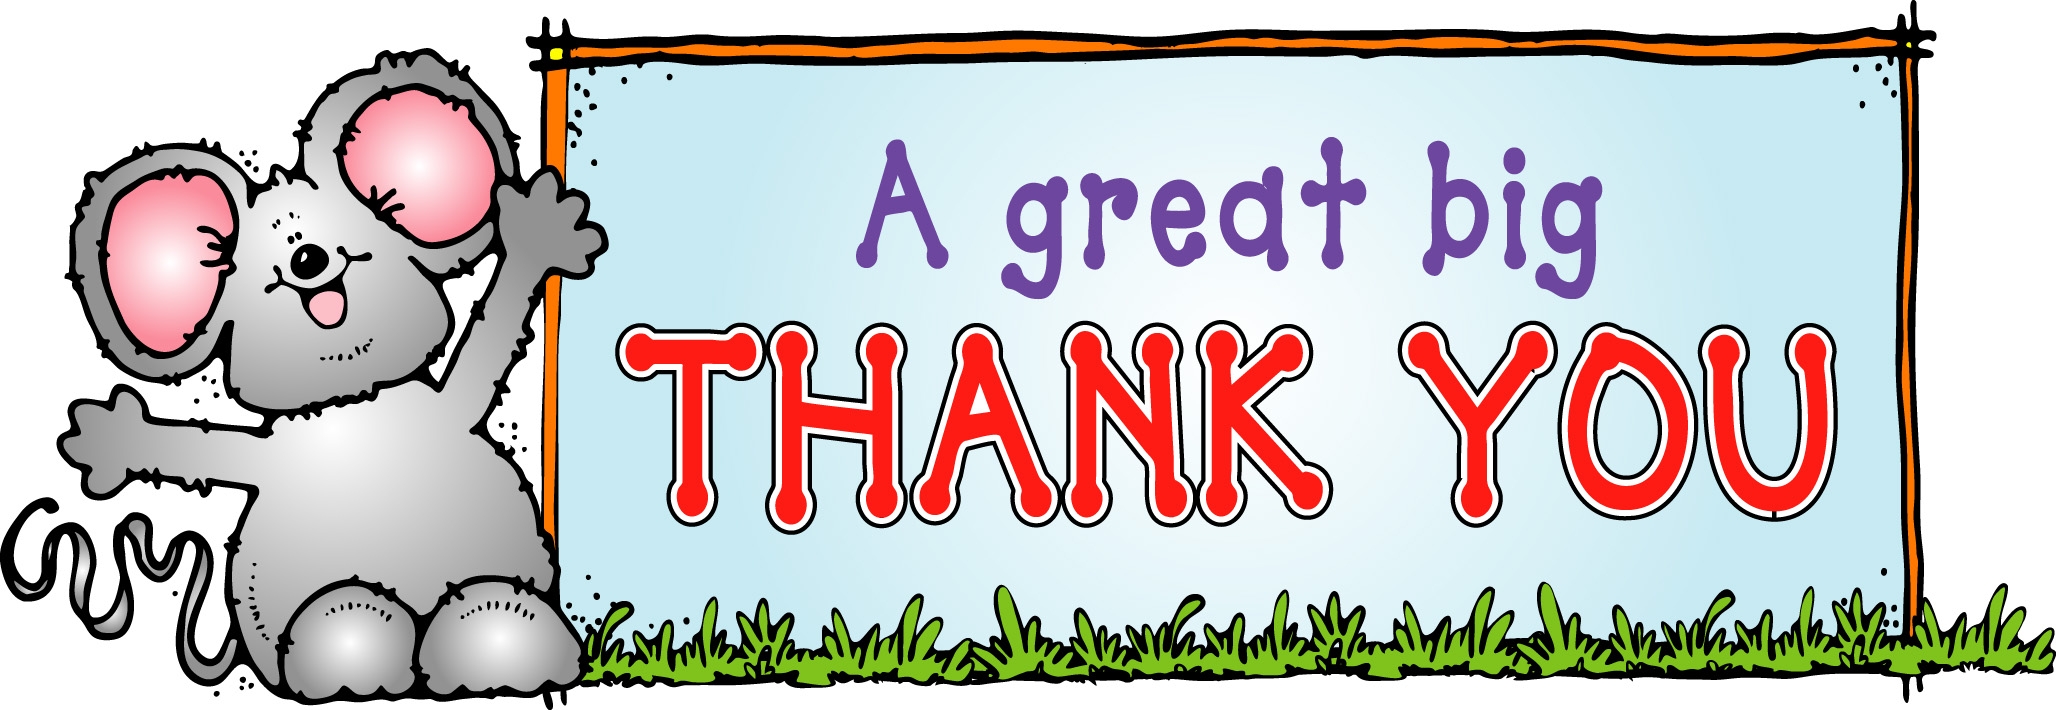 Clipart Images Of Thank You